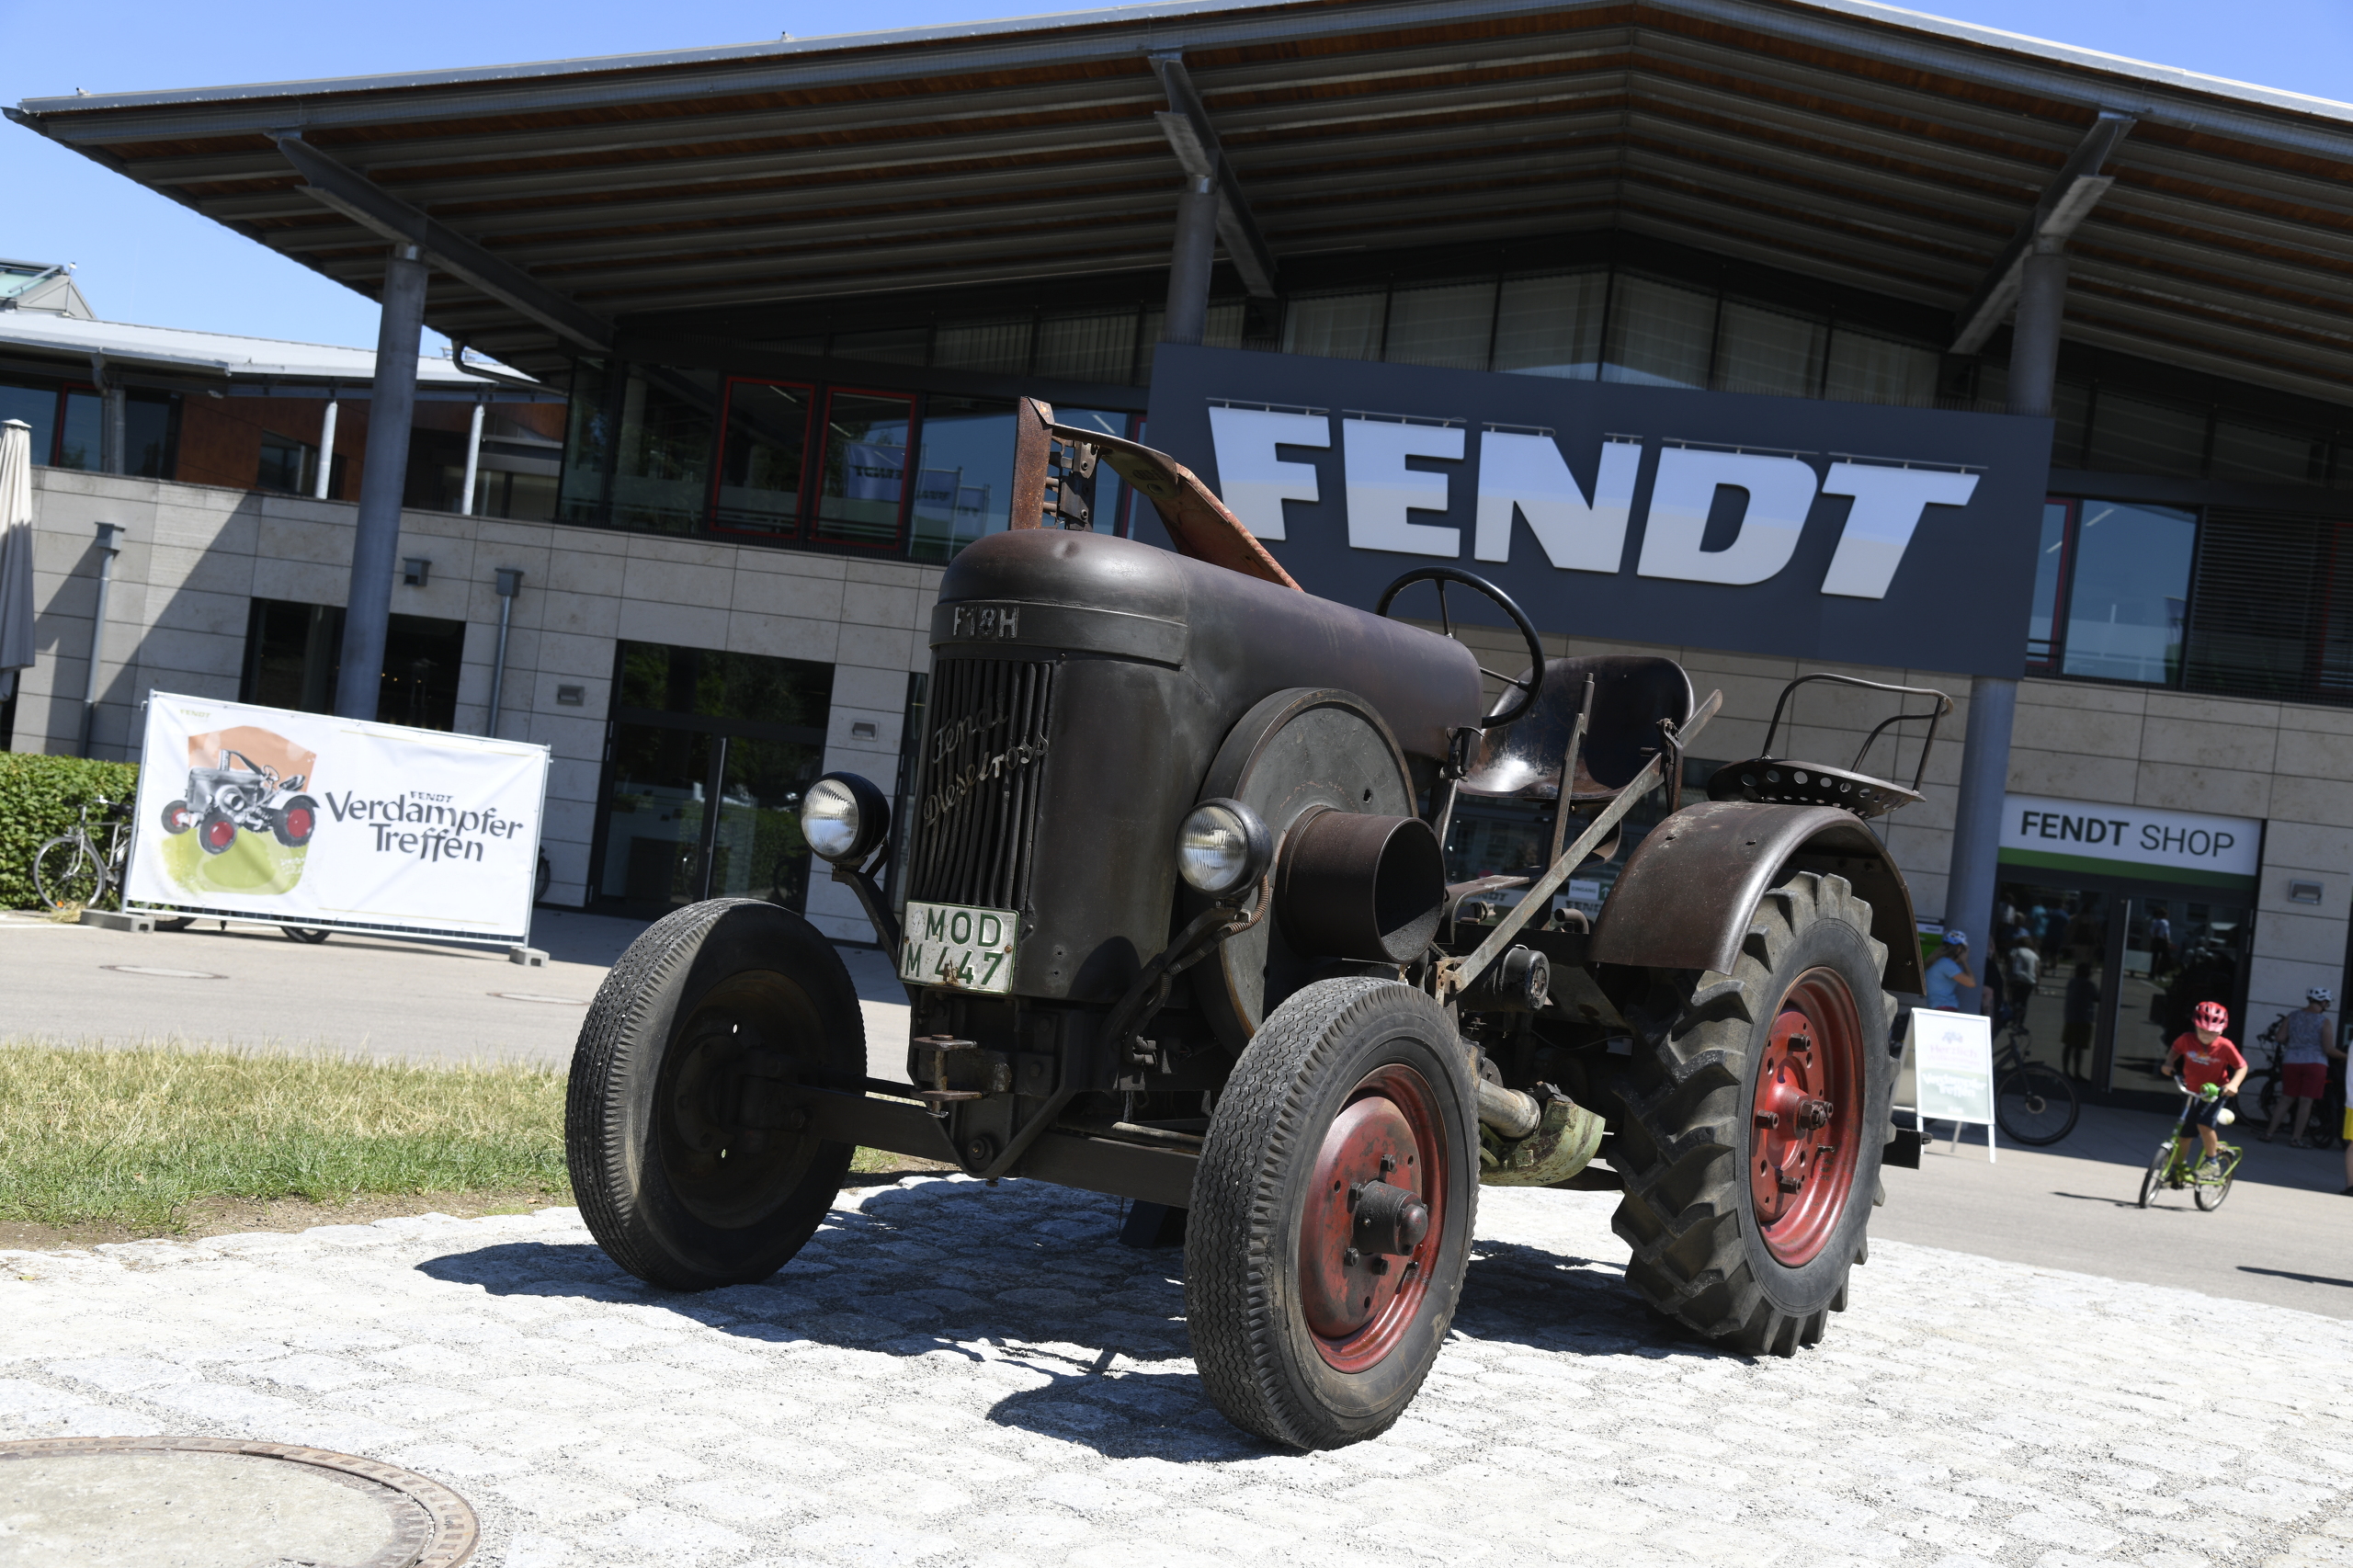 First Fendt Evaporator meeting with 100 Fendt Dieselross tractors and 3000 visitors